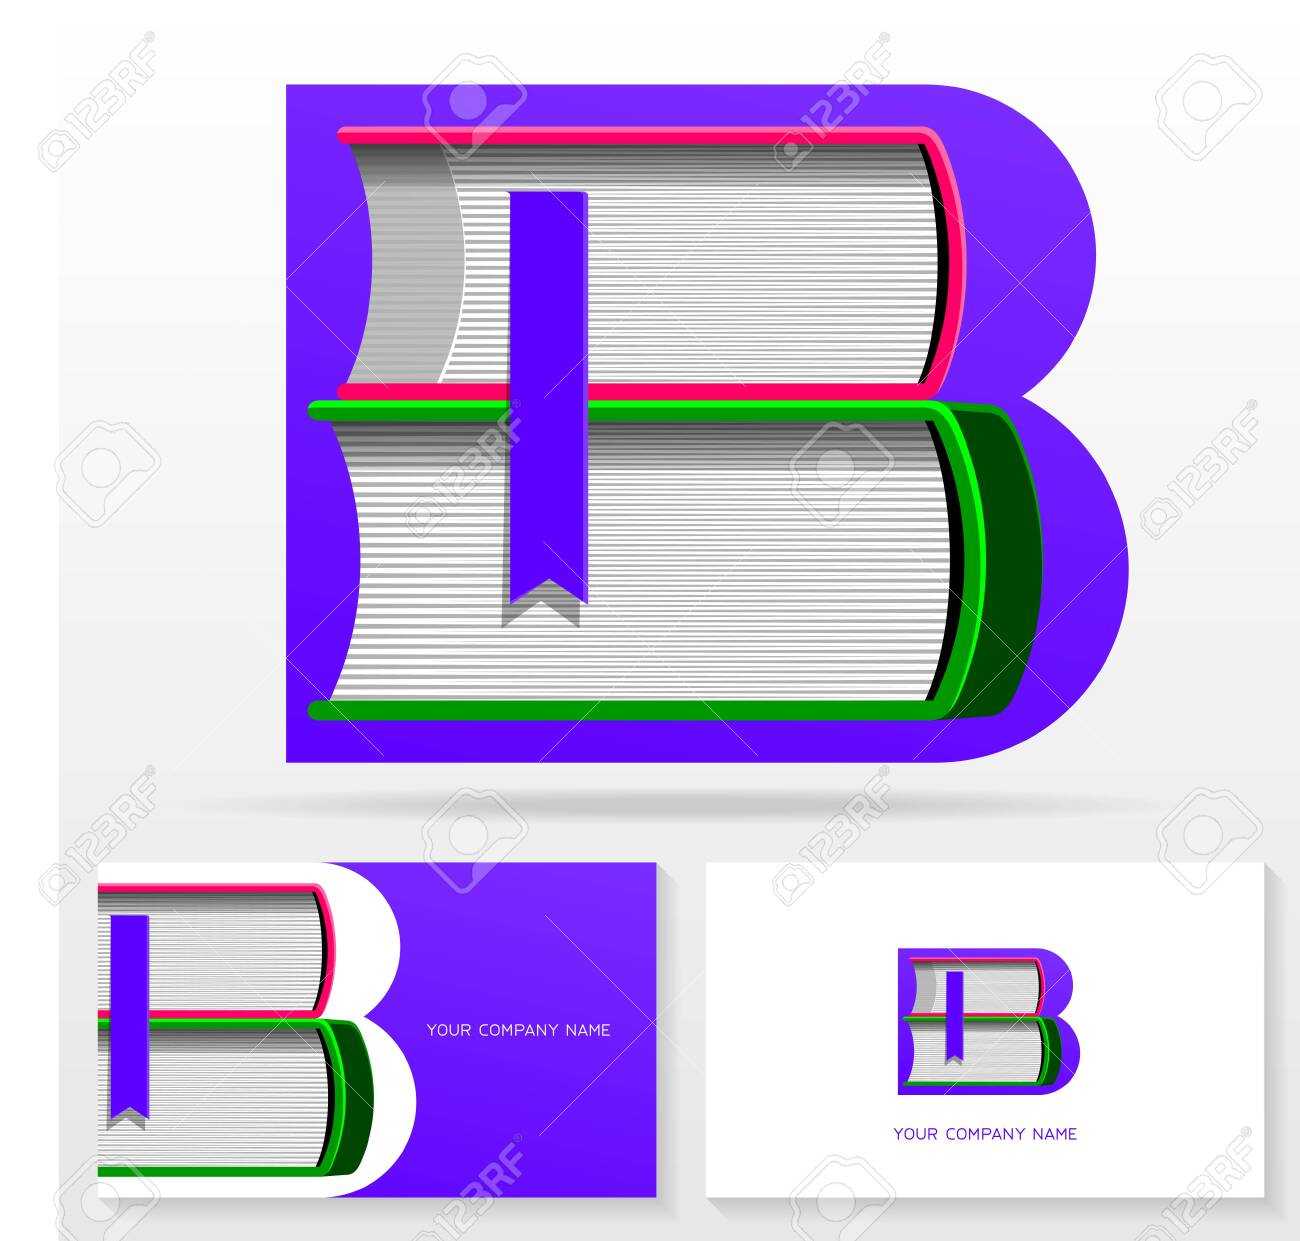 Letter B Logo Design Template. Letter B Made Of Books. Colorful.. Regarding Library Catalog Card Template